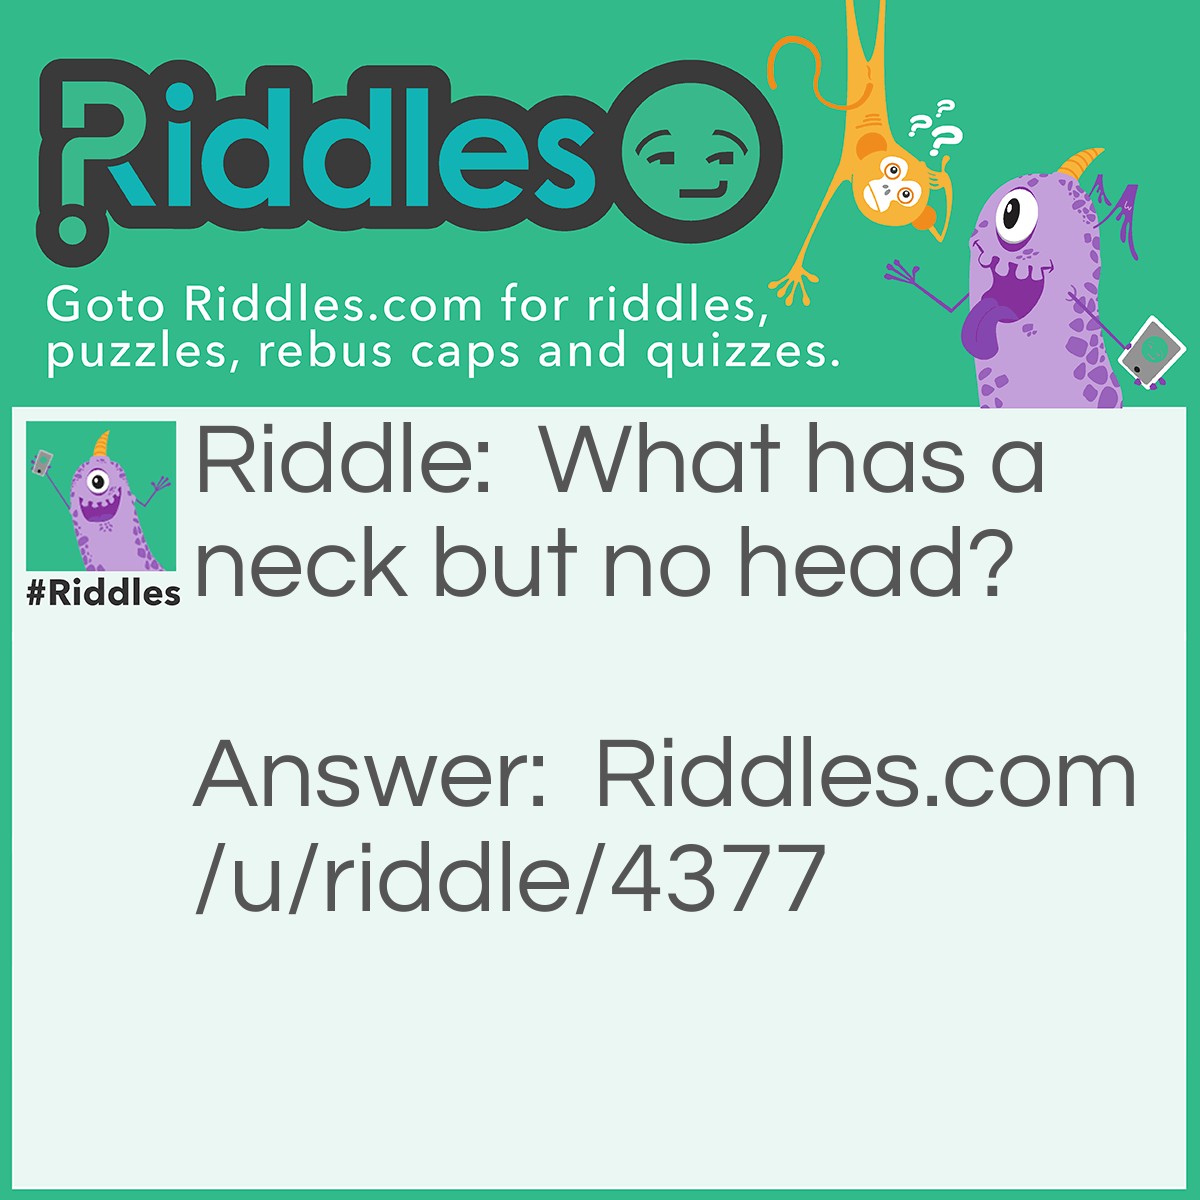 Riddle: What has a neck but no head? Answer: A bottle.